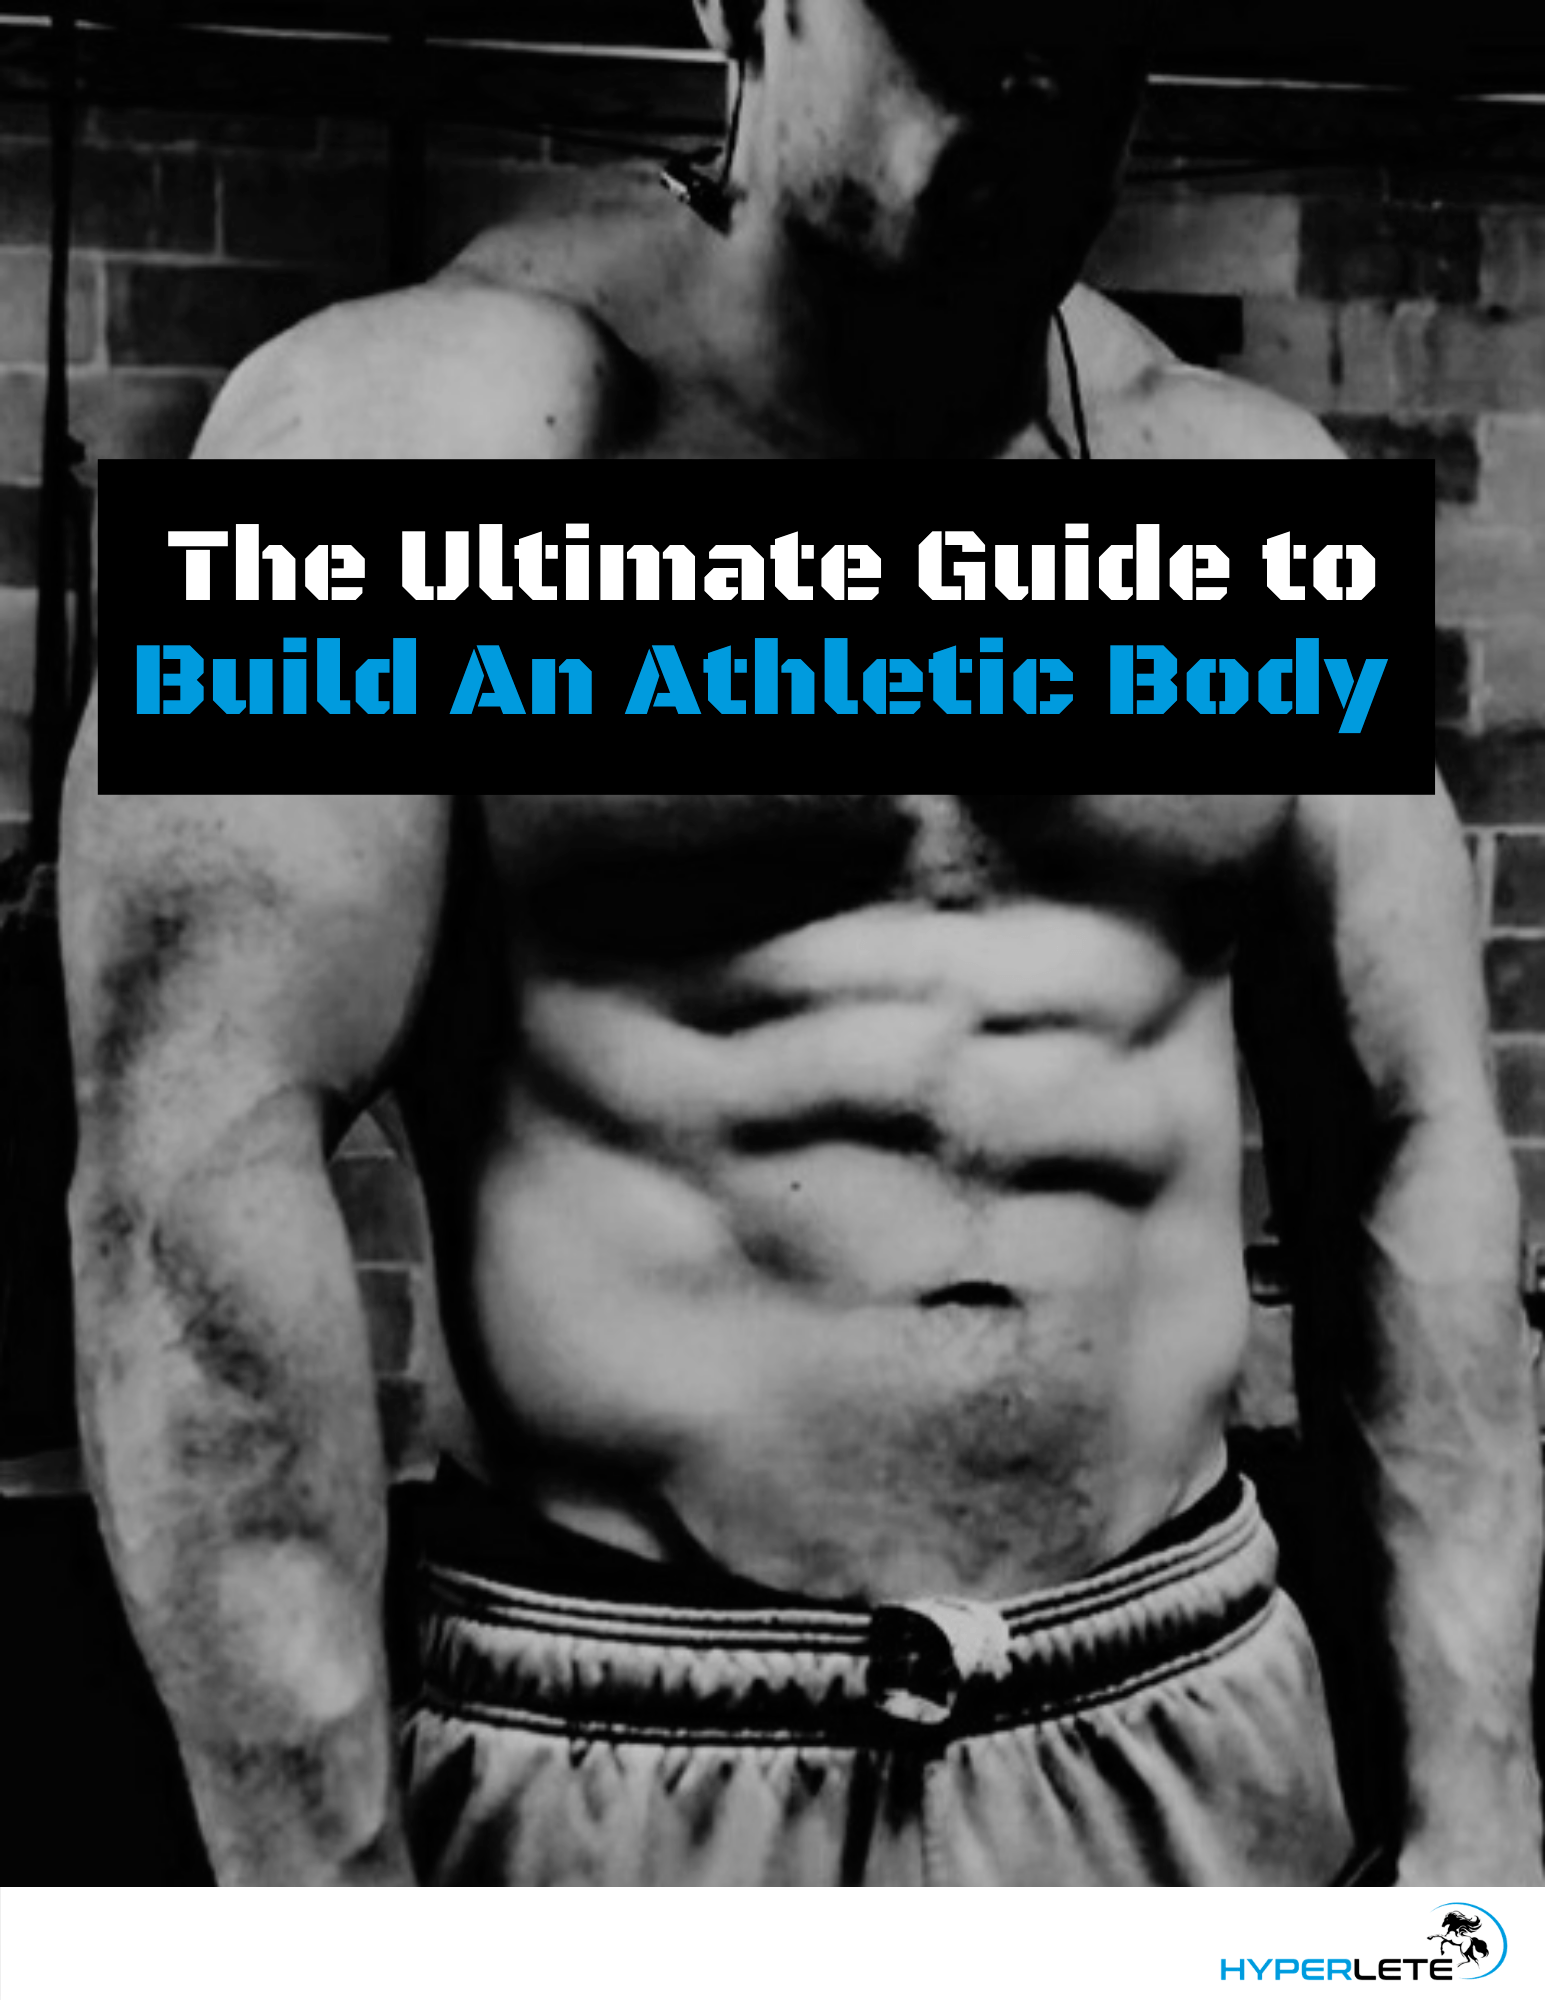 HyperLete's Ultimate Guide To Build An Athletic Body